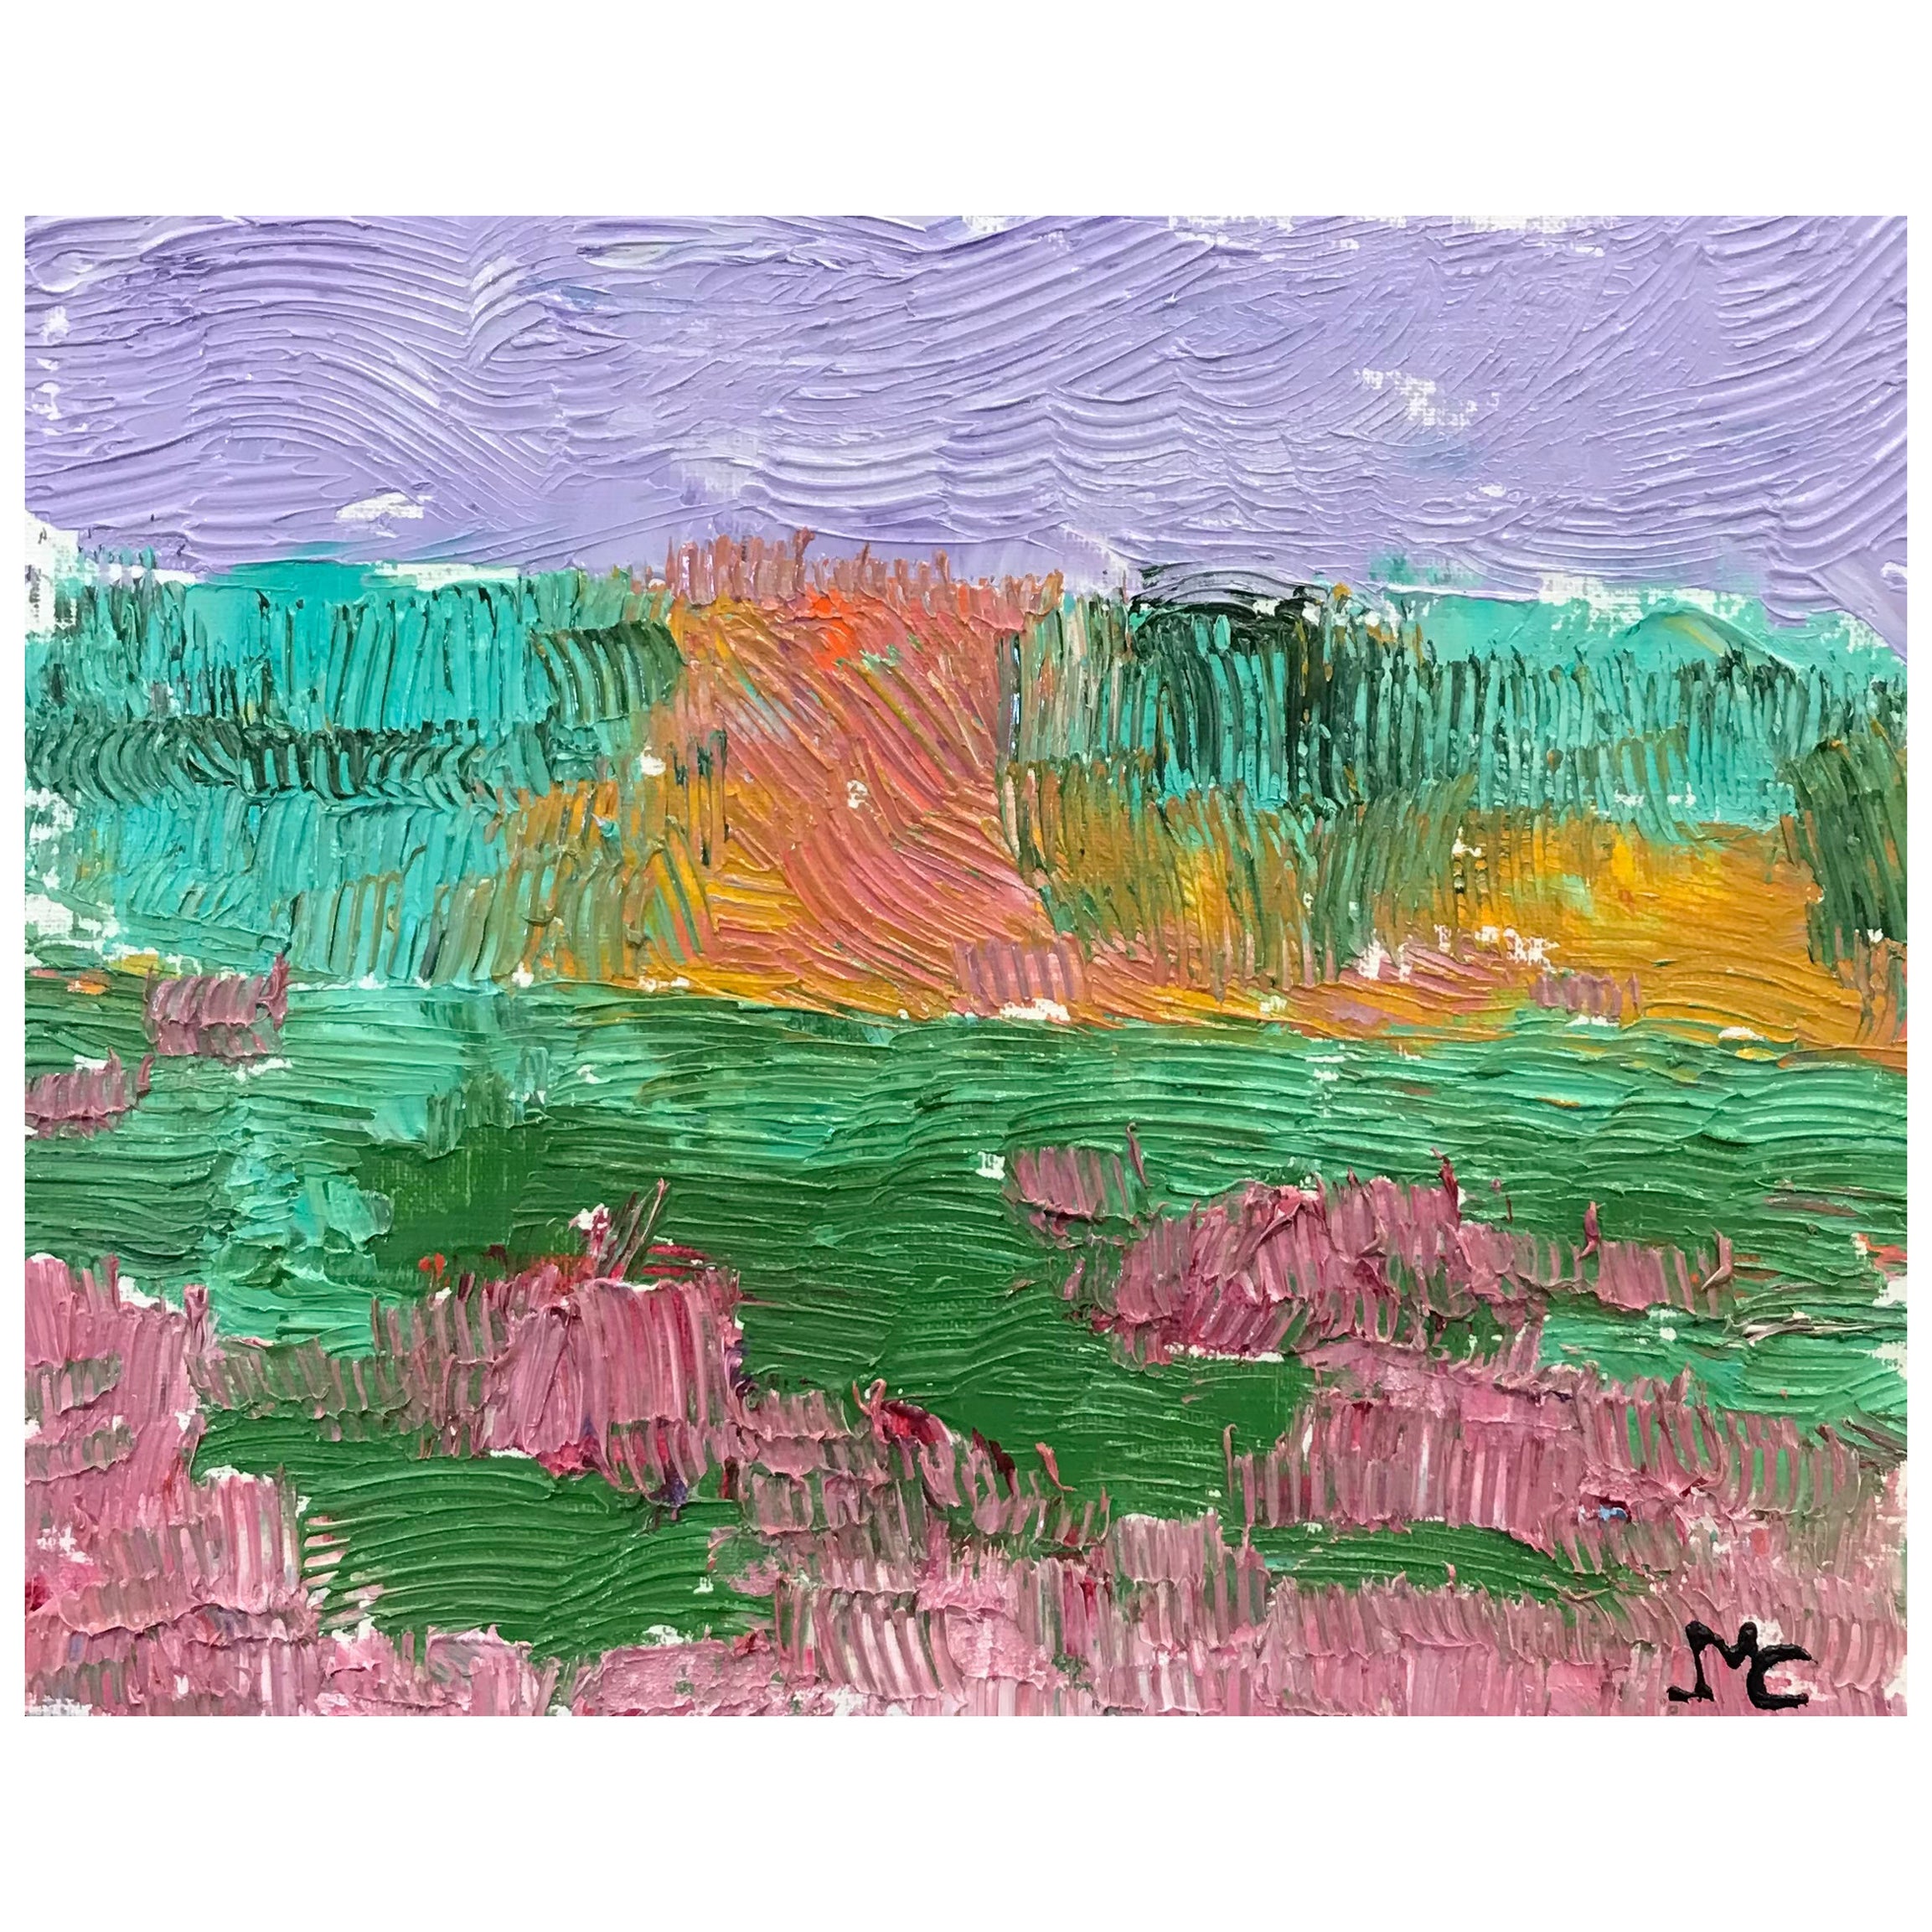 Bright & Colorful French Impressionist Oil Painting, Pink and Green Landscape